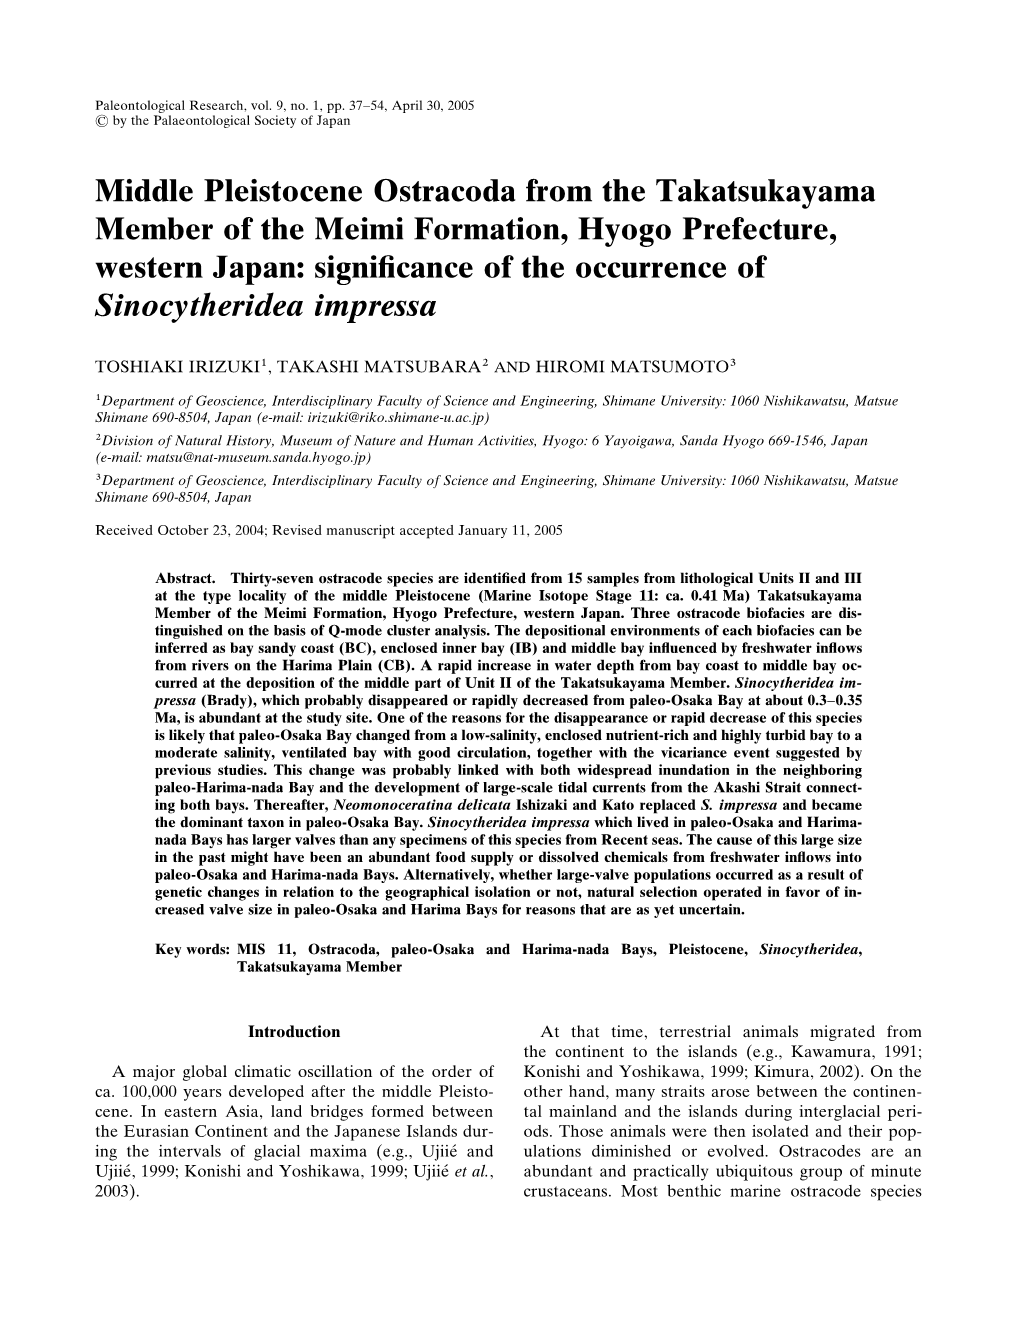 Middle Pleistocene Ostracoda from the Takatsukayama Member of the Meimi Formation, Hyogo Prefecture, Western Japan